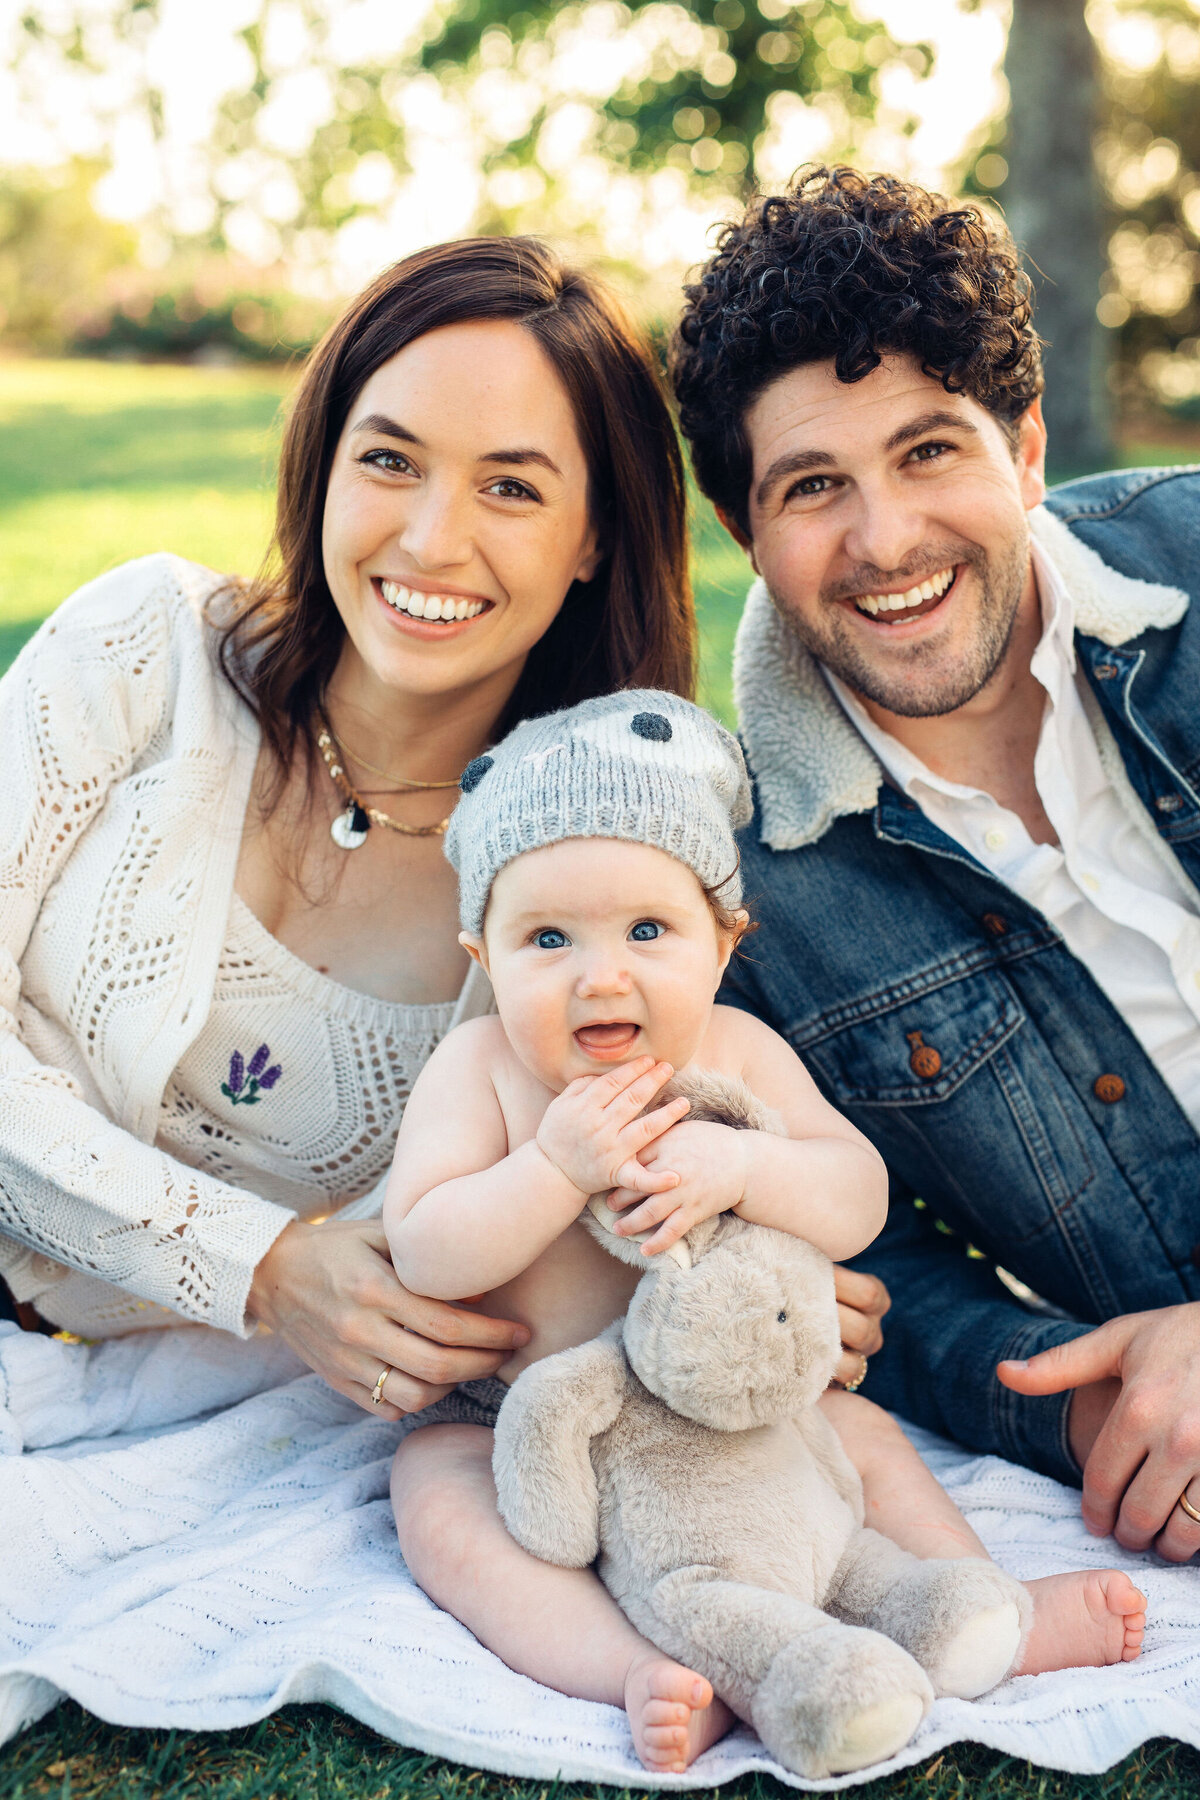 Family Portrait Photo Of Couple Sitting On The Ground With Their Baby Who's Hugging a Stuffed Toy Los Angeles